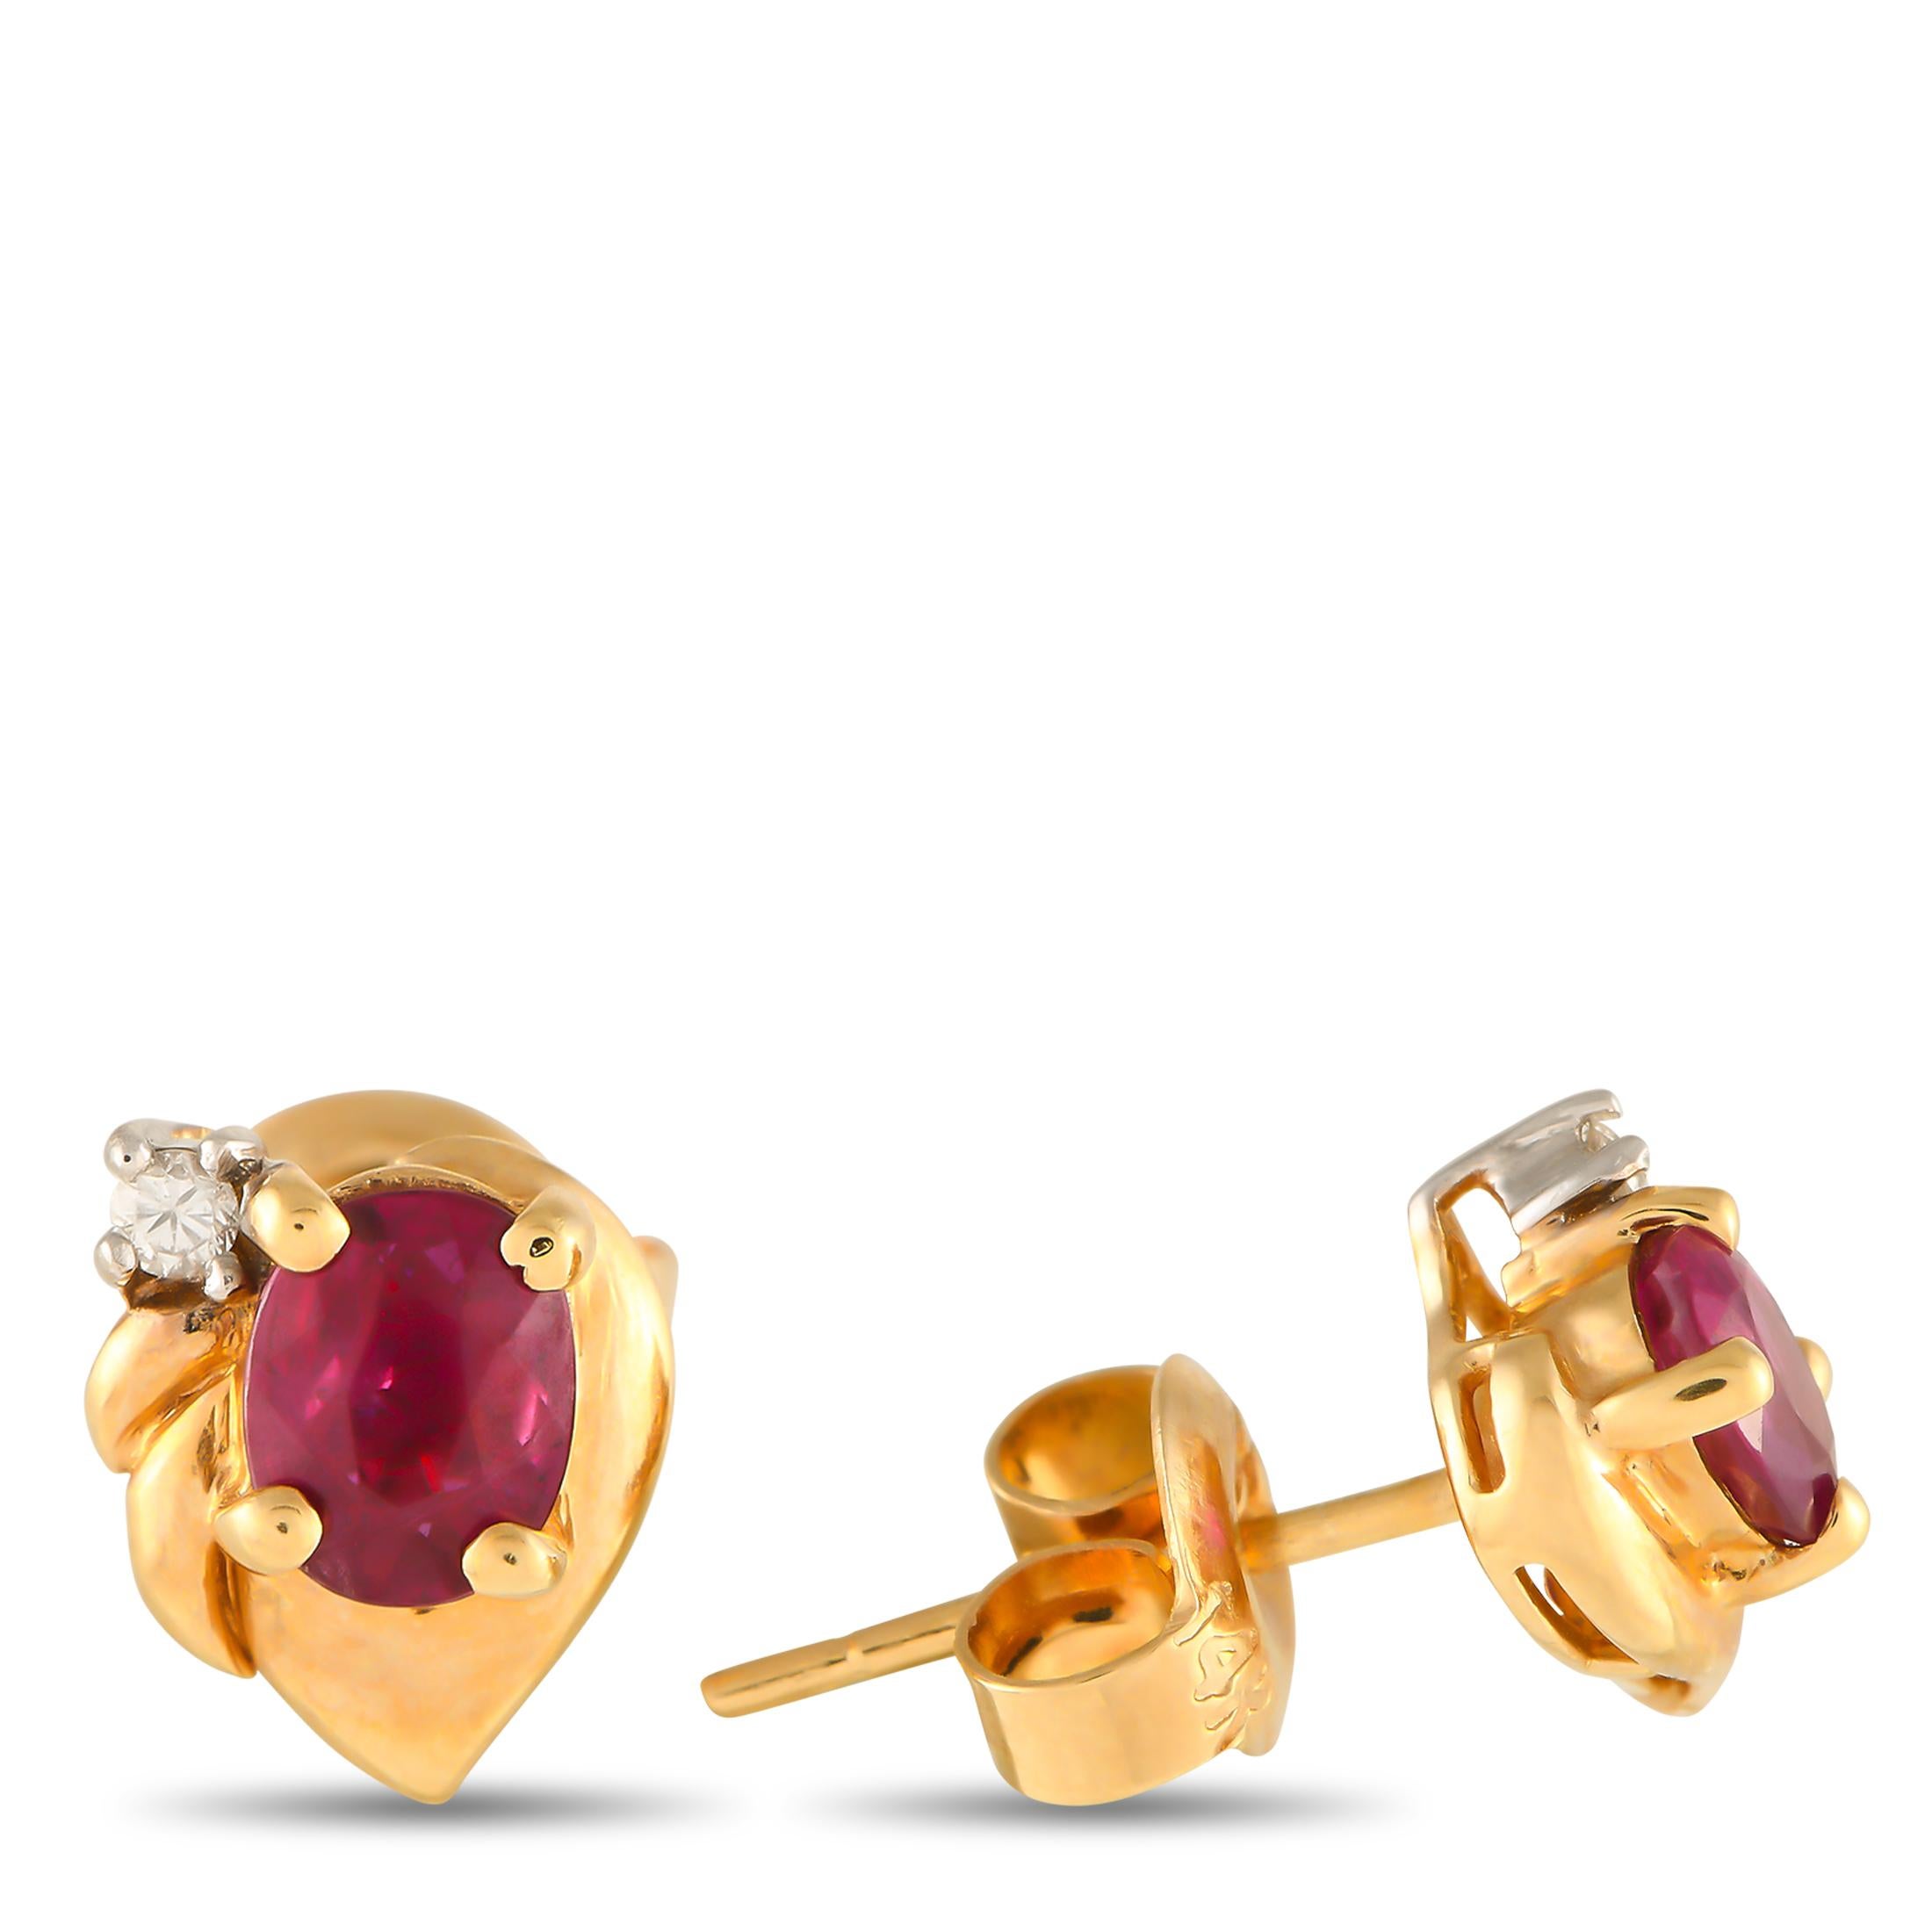 Captivating Ruby gemstones make a statement at the center of these uniquely elegant earrings. Crafted from 14K Yellow Gold, each one measures 0.25 round.This jewelry piece is offered in brand new condition and includes a gift box.
